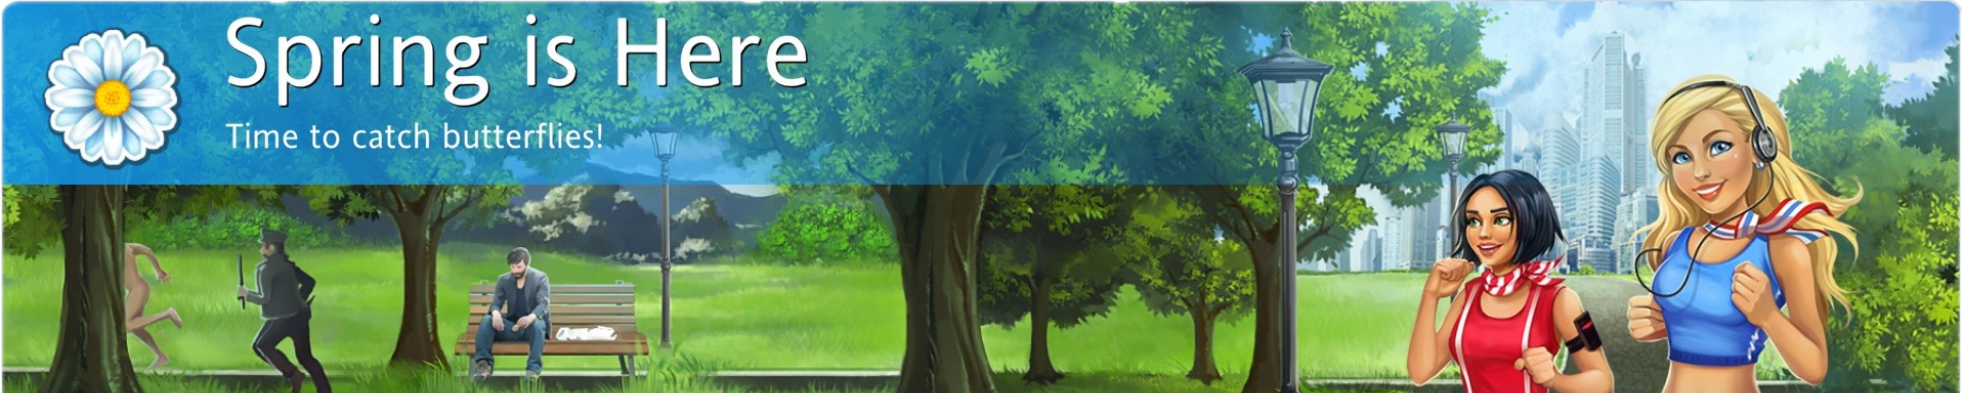 spring is here banner.png